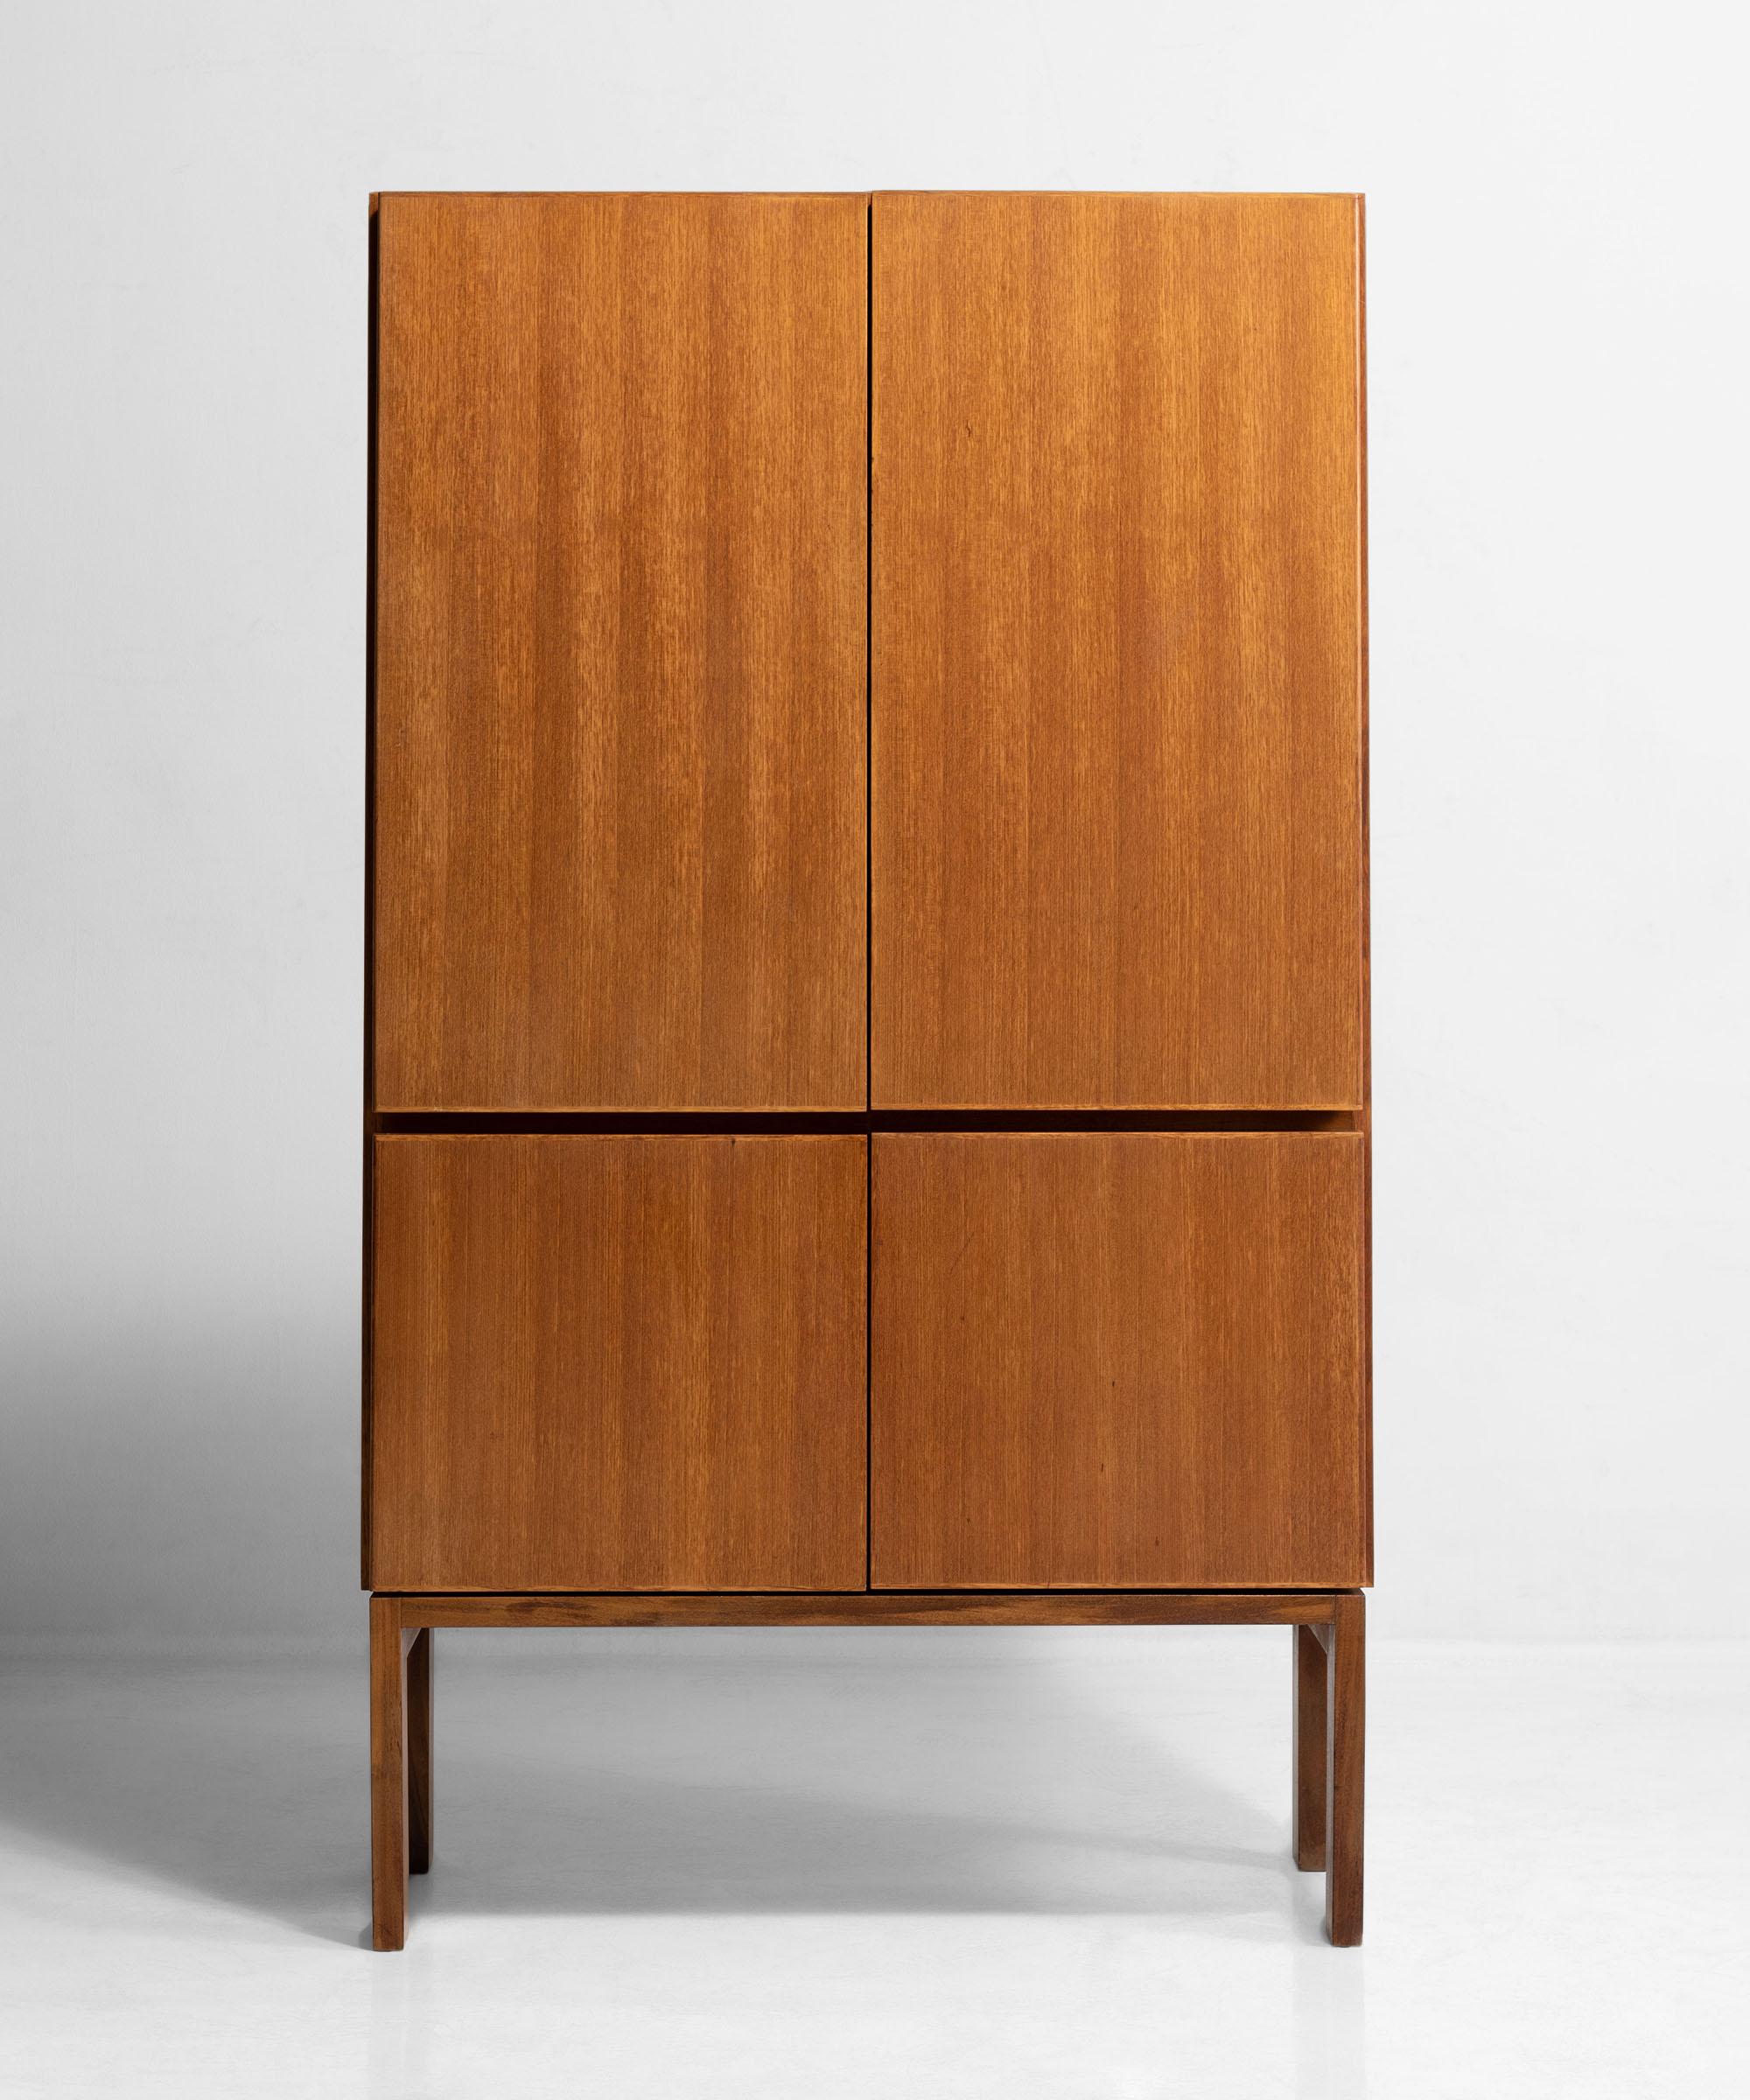 Model “GR69” four door cabinet with interior shelving on simple straight legs.